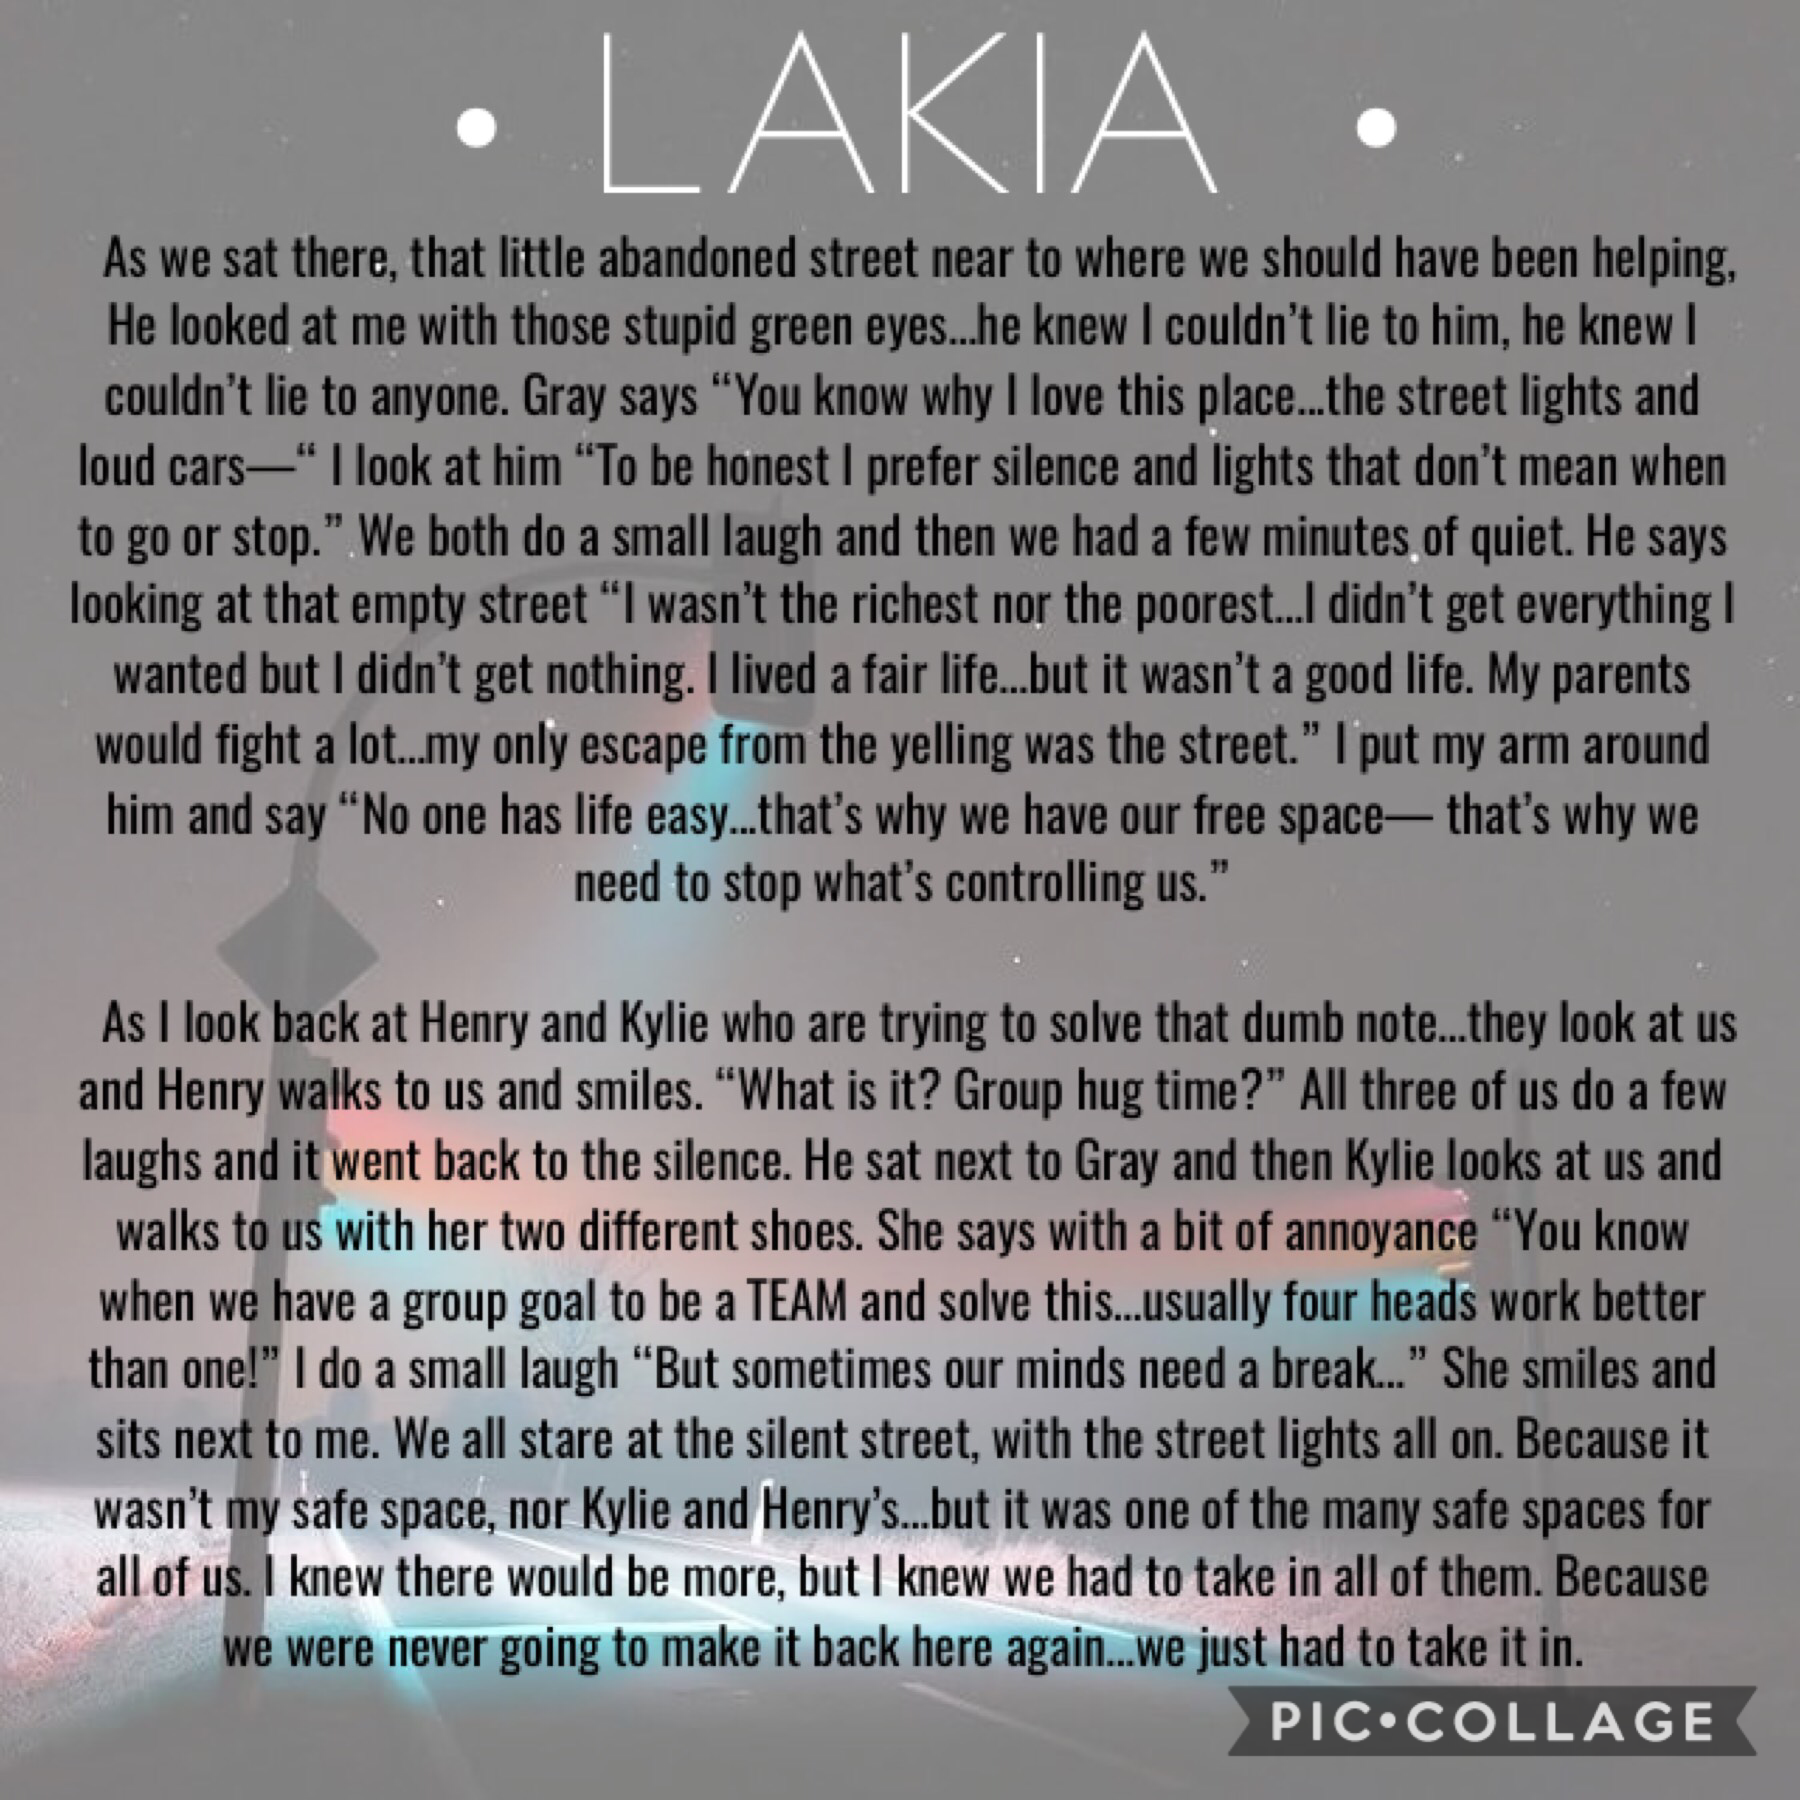 ....
This is in the point of view of a girl named Lakia
She is rebel who wanted to get away from her home...her dad...